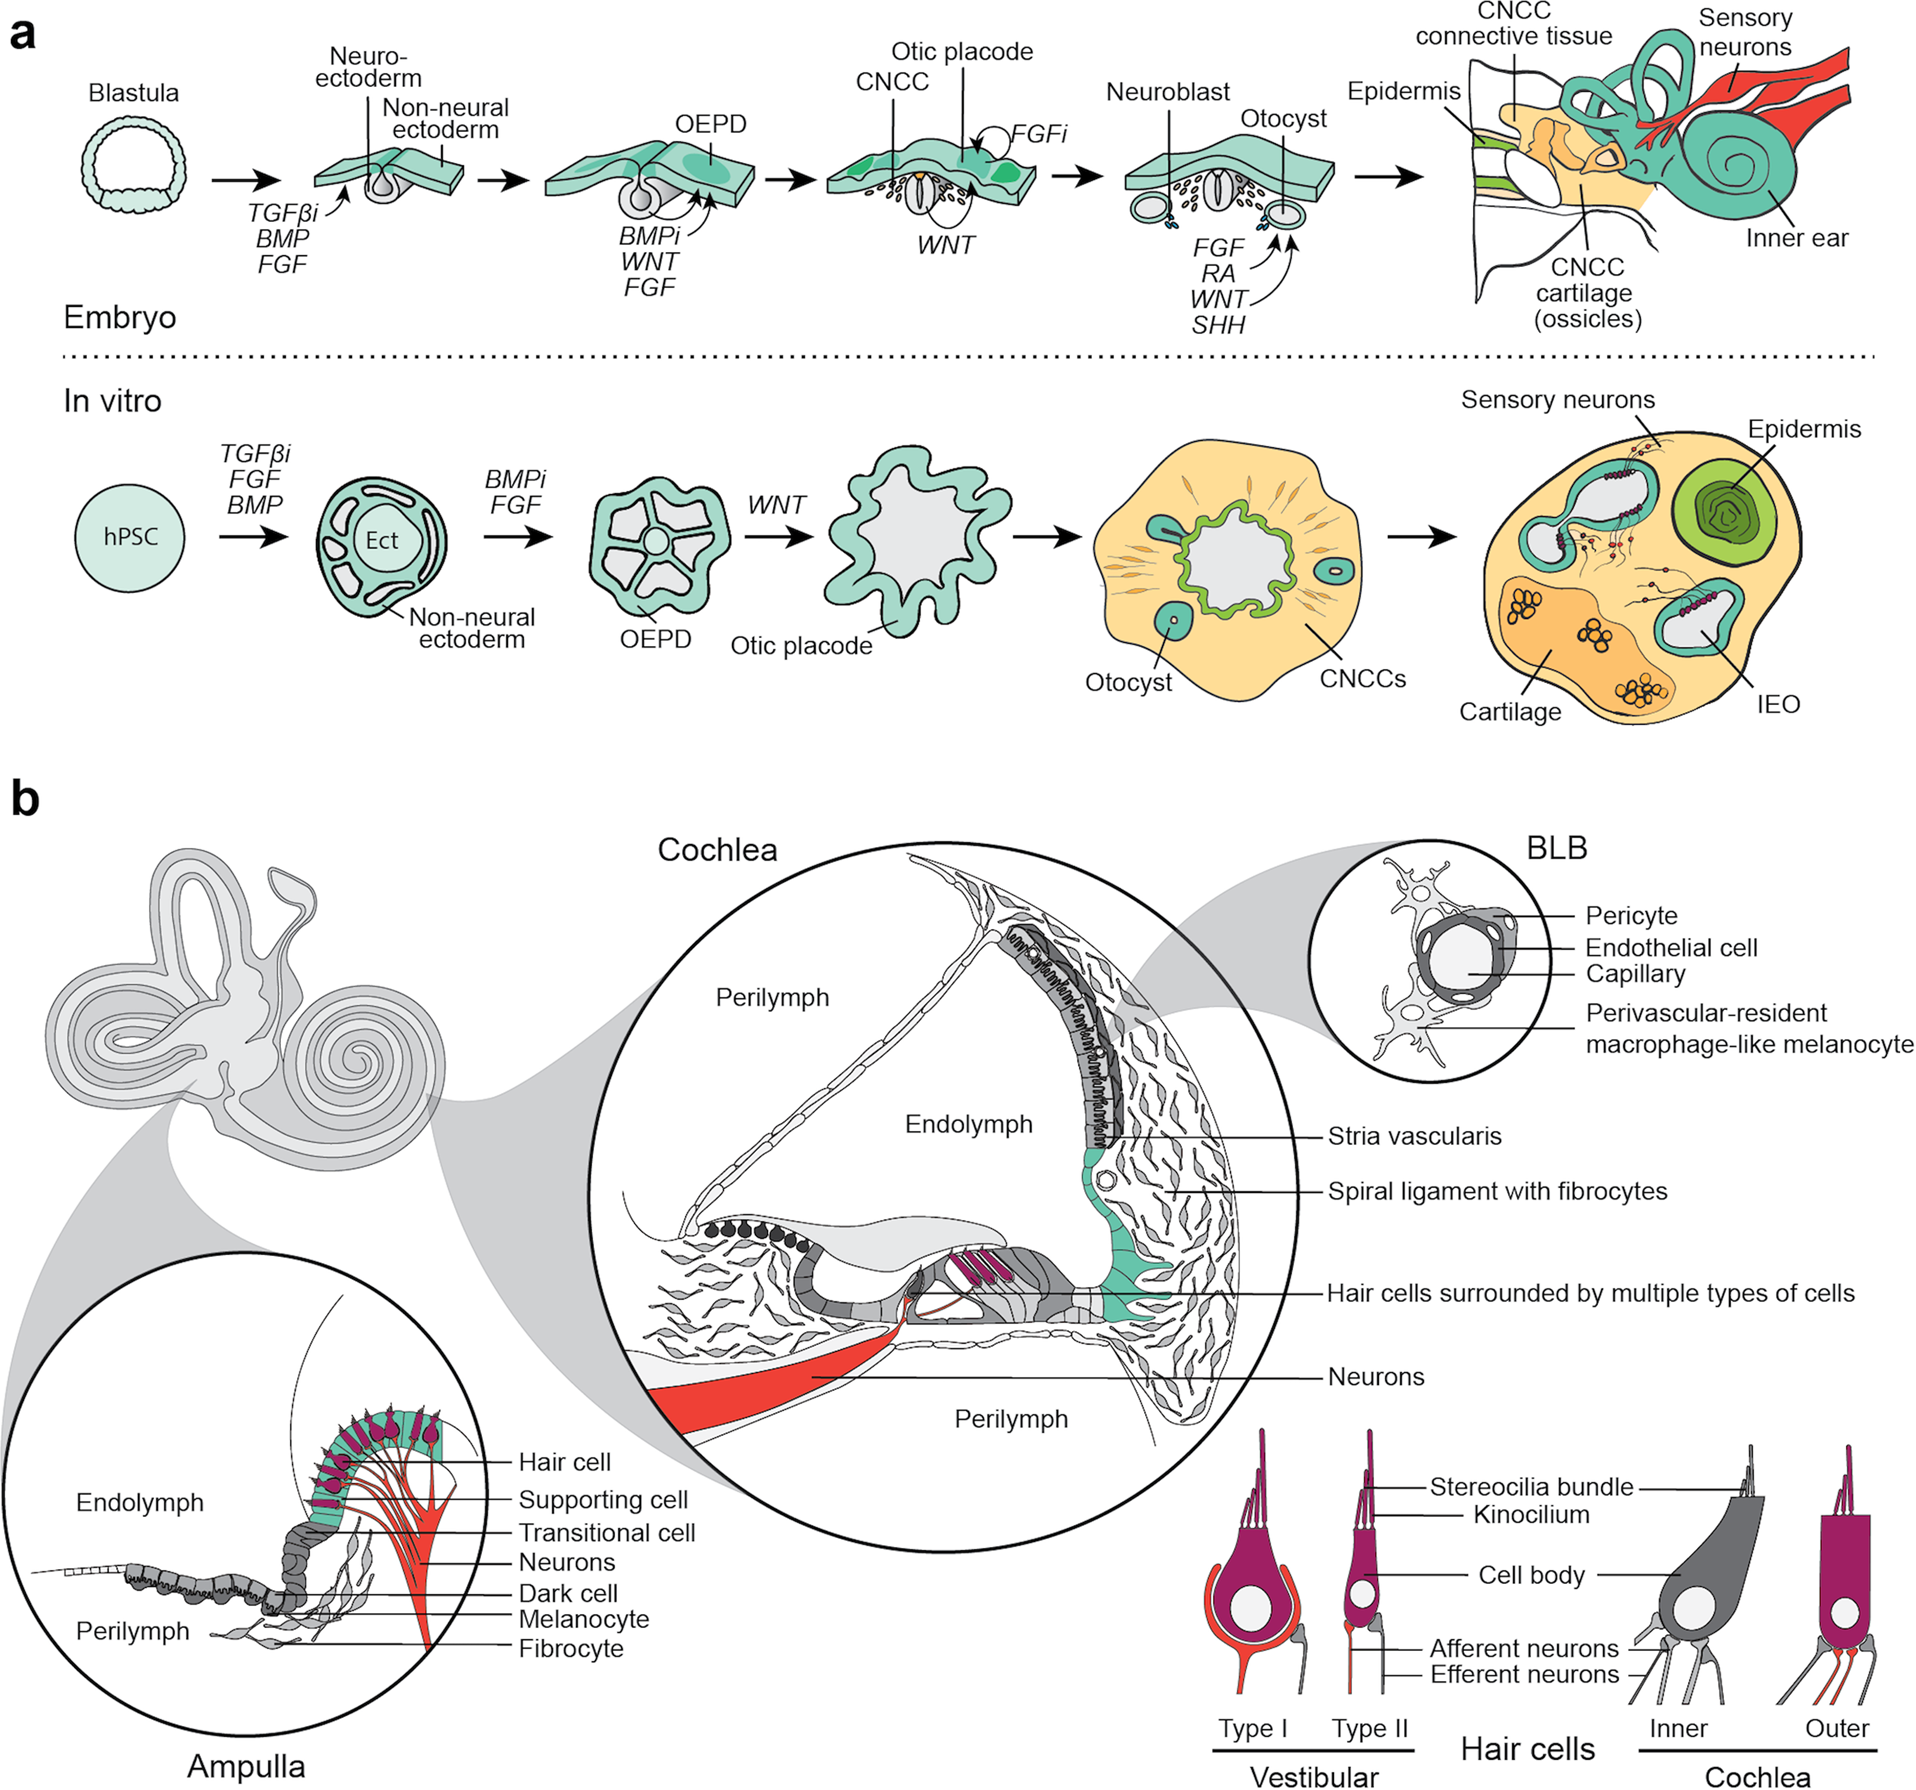 Building inner ears: recent advances and future challenges for in vitro  organoid systems